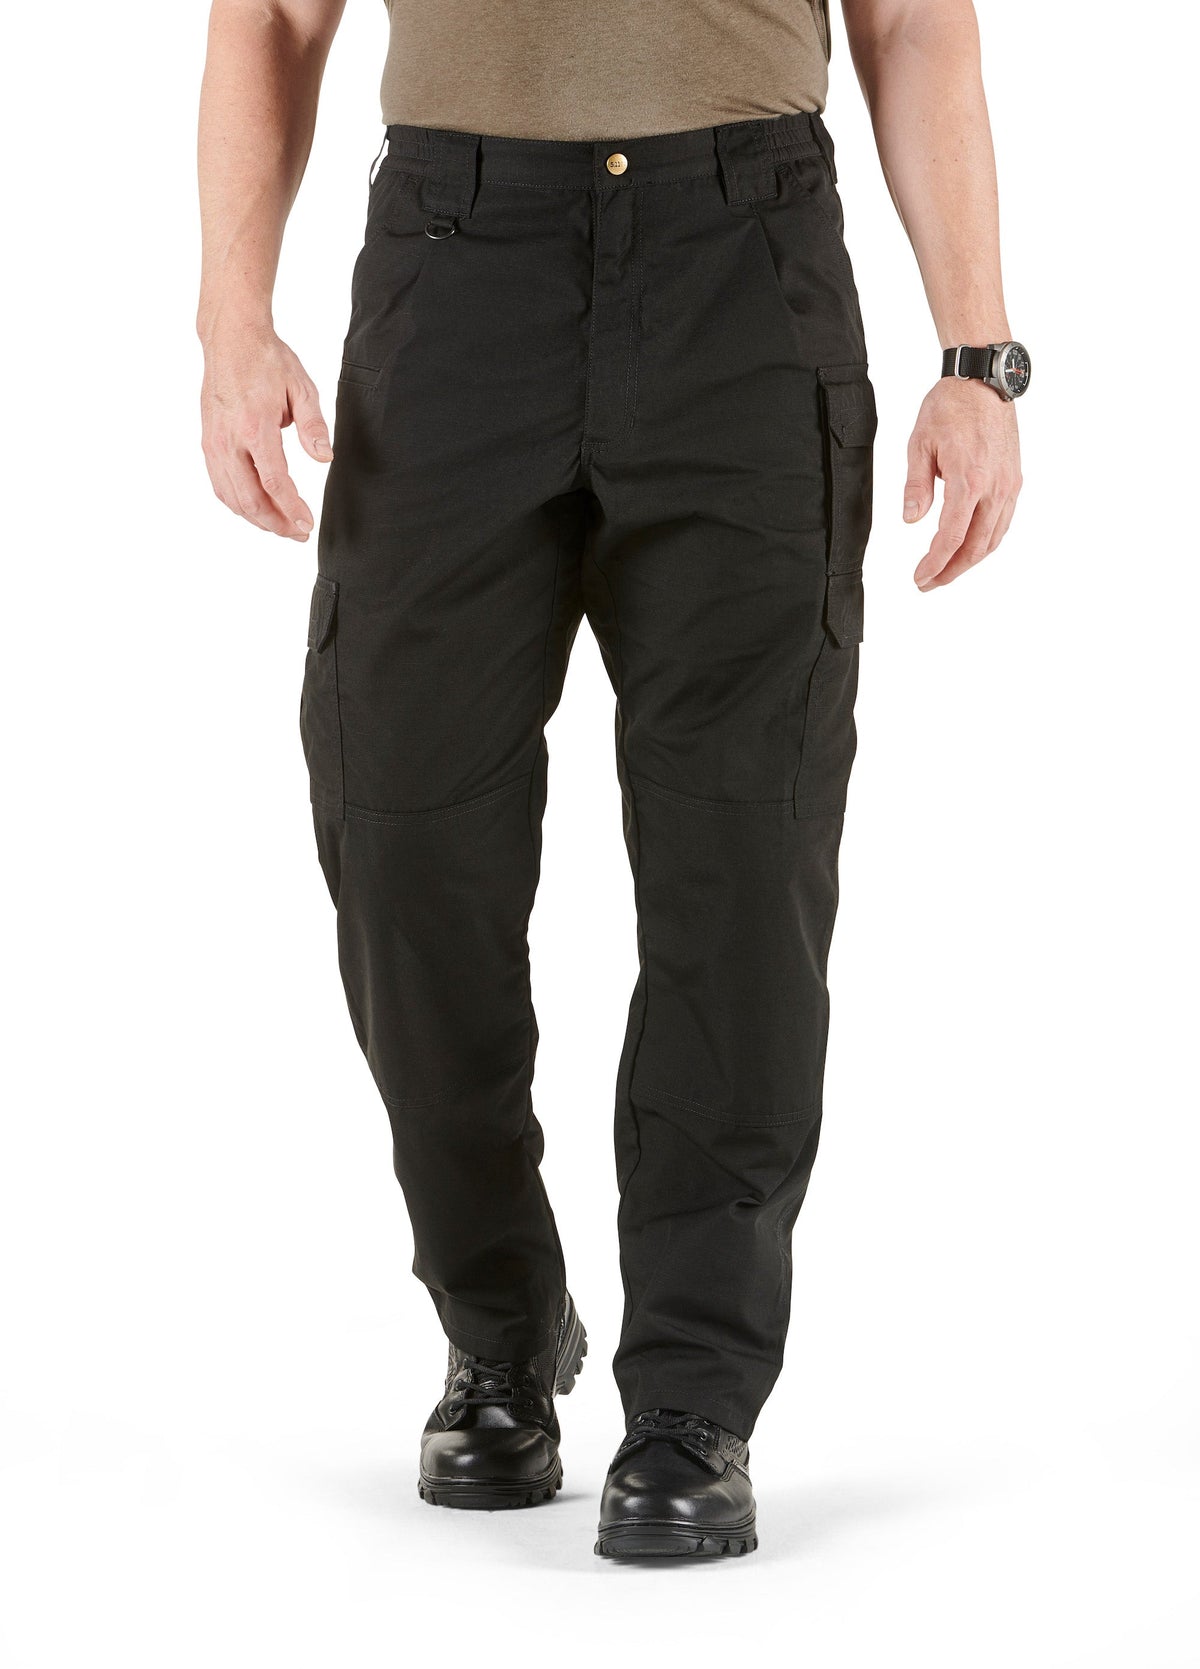 5.11® Tactical Men&#39;s Taclite® Pro Pant_Black - Work World - Workwear, Work Boots, Safety Gear